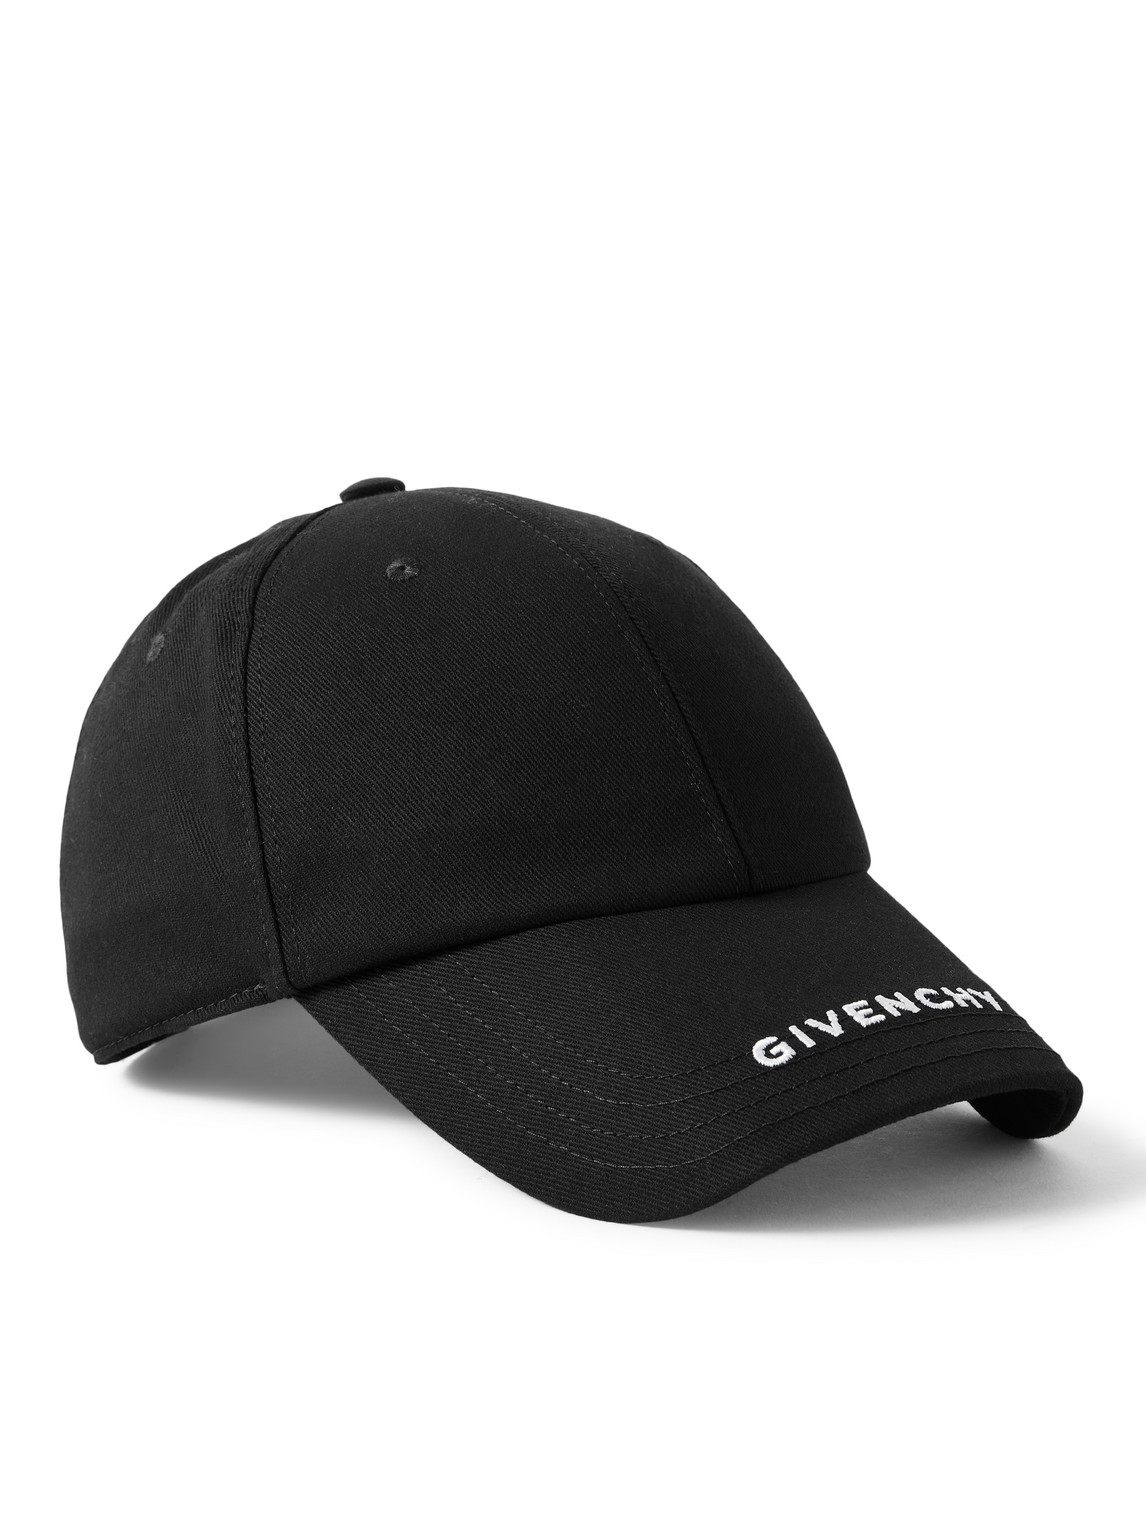 GIVENCHY LOGO-EMBROIDERED COTTON-BLEND TWILL BASEBALL CAP